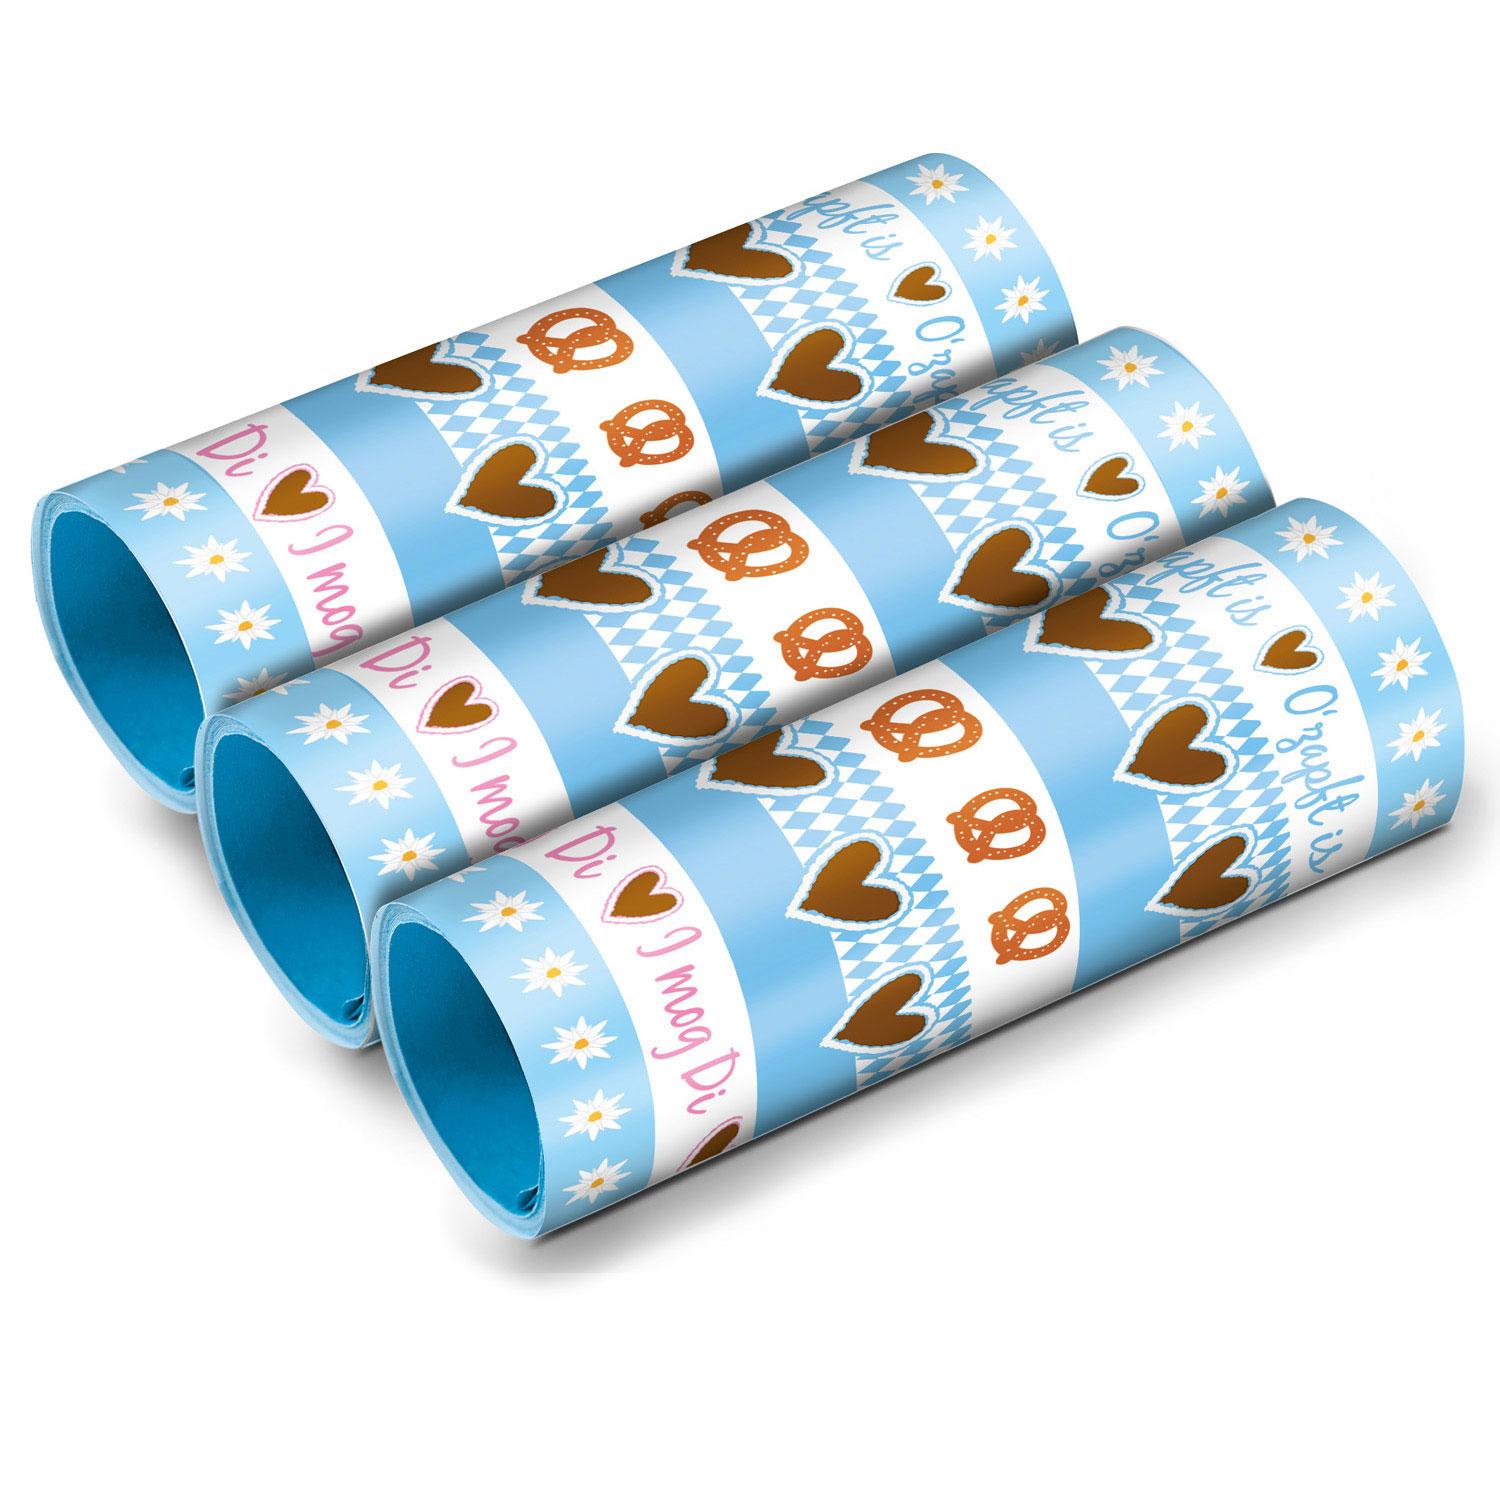 Bavarian Oktoberfest Streamers 3rolls by Amscan 993345 available here at Karnival Costumes online Oktoberfest party shop